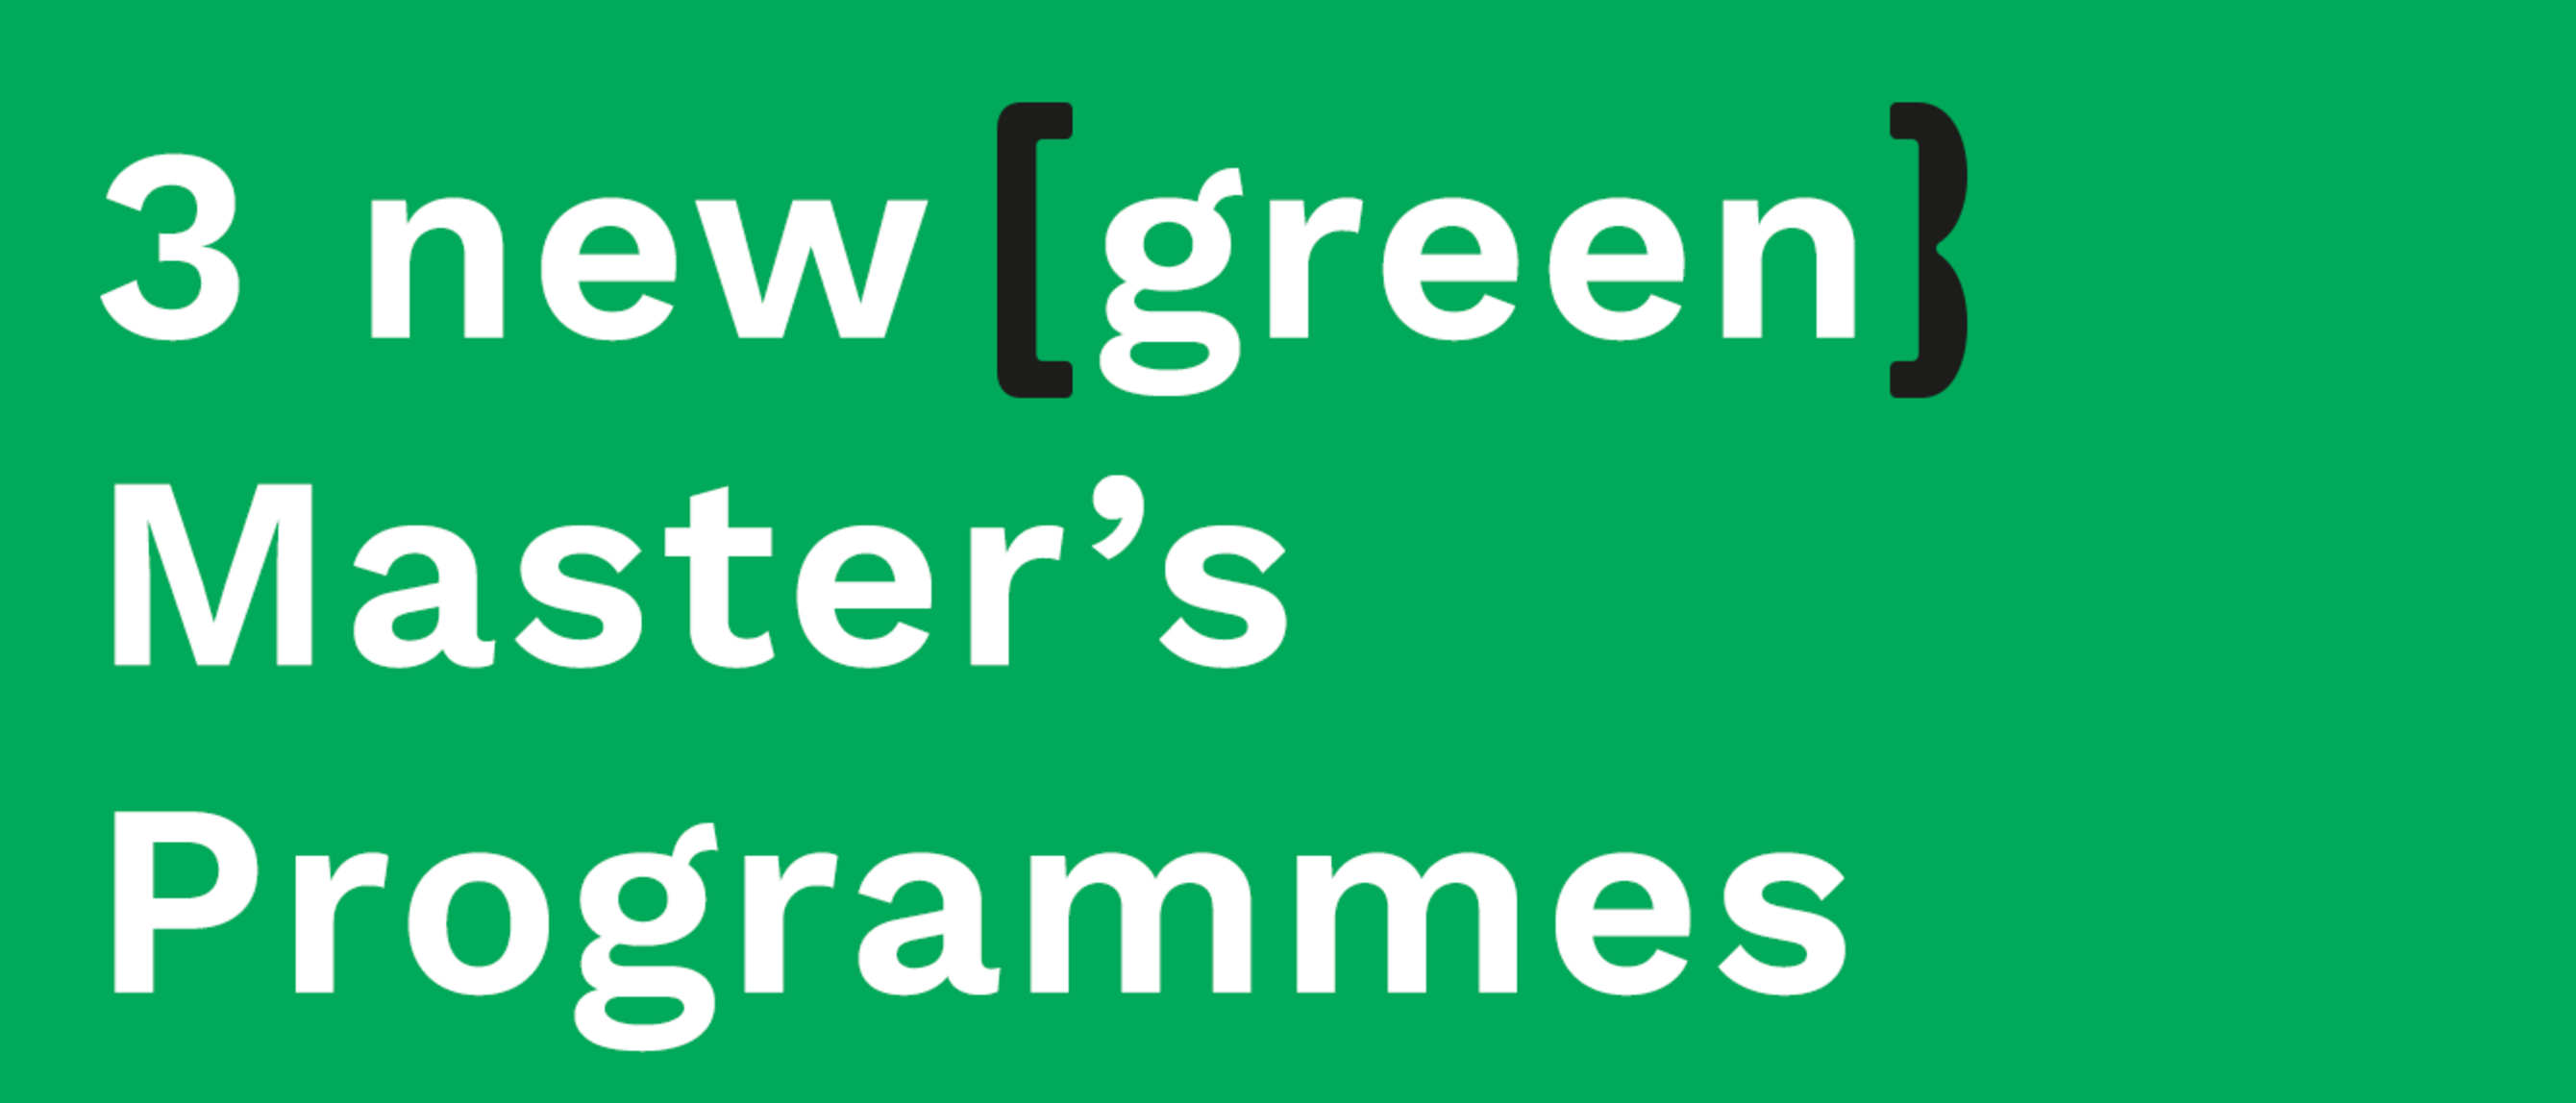 text in image: 3 new green master's programmes